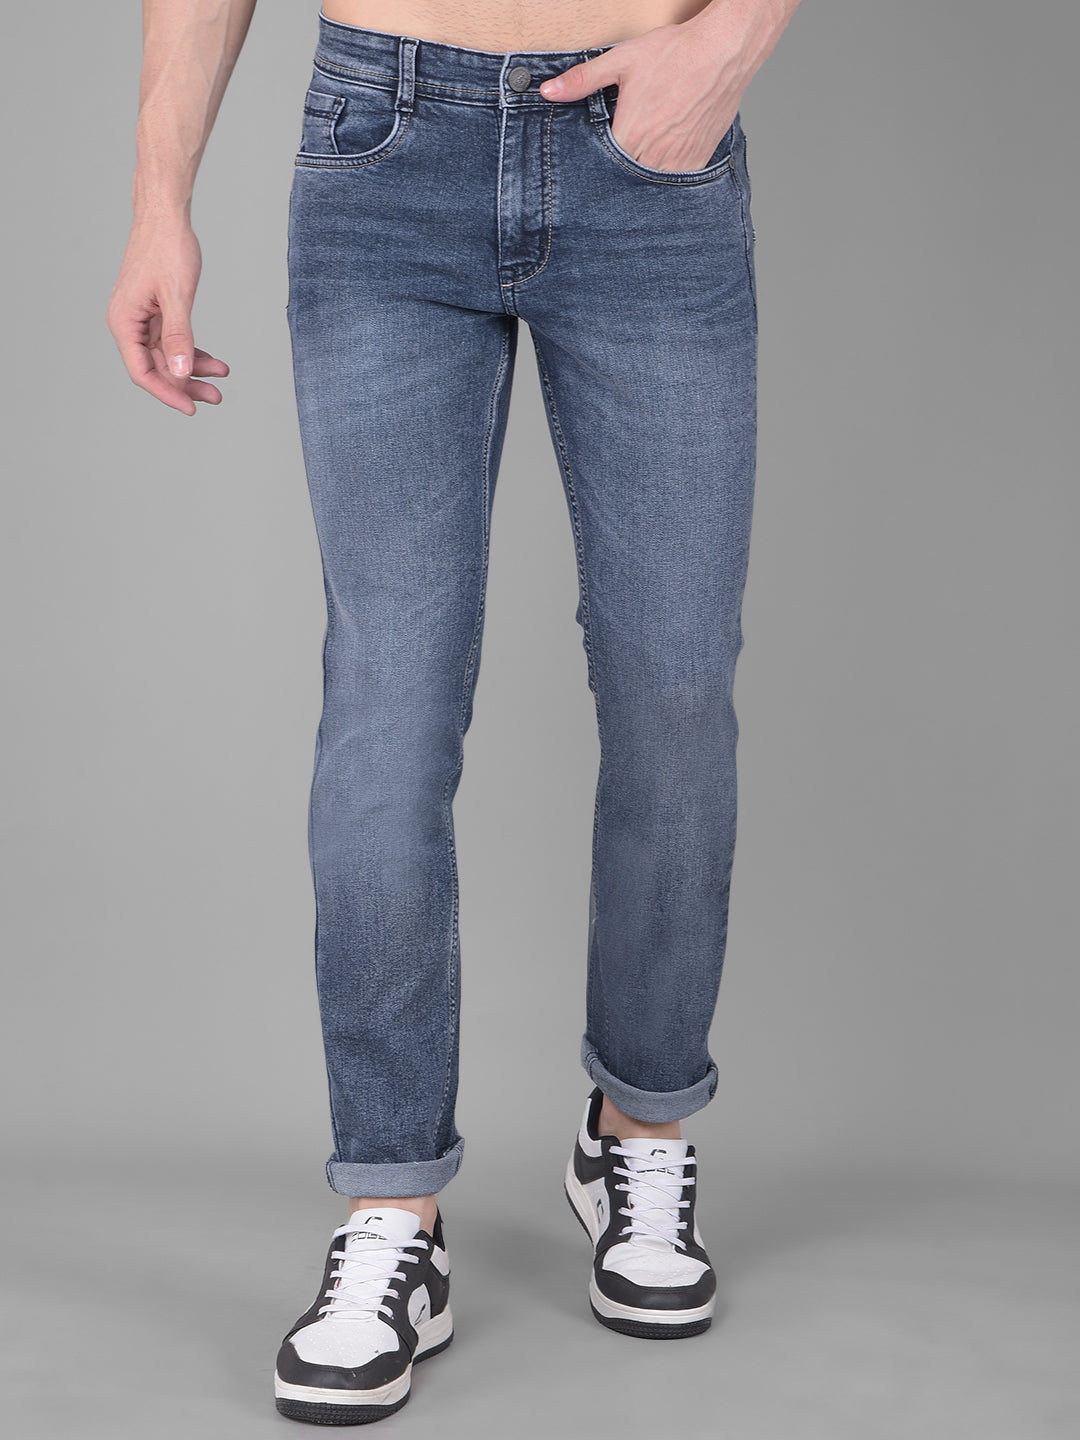 Top 142+ grey shoes with blue jeans best